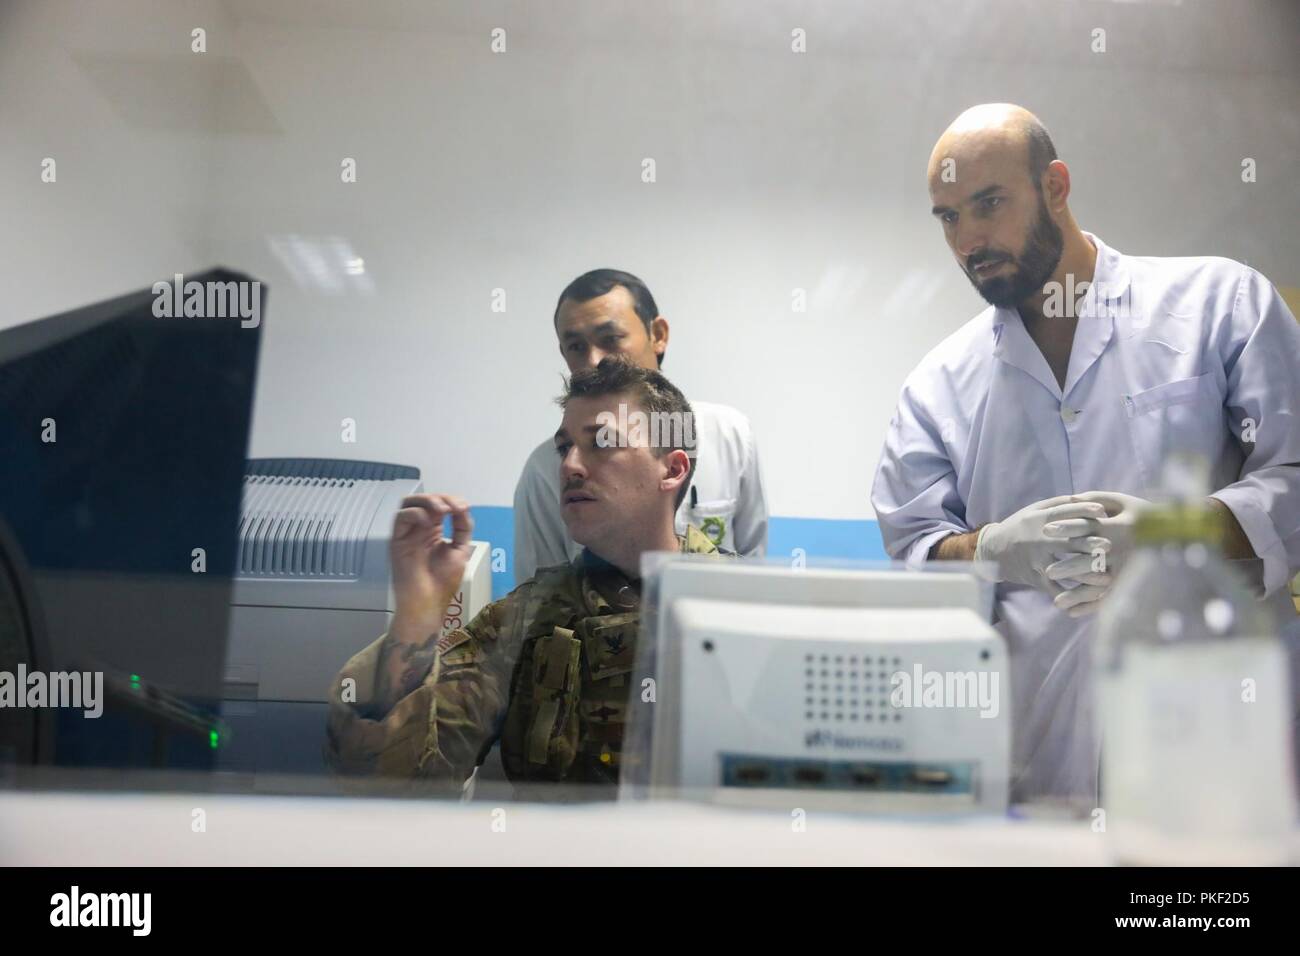 KANDAHAR PROVINCE, Afghanistan (August 5, 2018) -- U.S. Navy Hospital Corpsman 3rd Class Thomas Fite, a radiology technician for Kandahar Airfield NATO Role III Multinational Medical Unit, looks over results of an x-ray, August 5, 2018, to help his Afghan counterparts during a medical advisory visit at Kandahar Regional Military Hospital, Camp Hero in Kandahar, Afghanistan. Staff members from the Role III conduct routine visits to KRMH to train and advice Afghan medical staff. Stock Photo